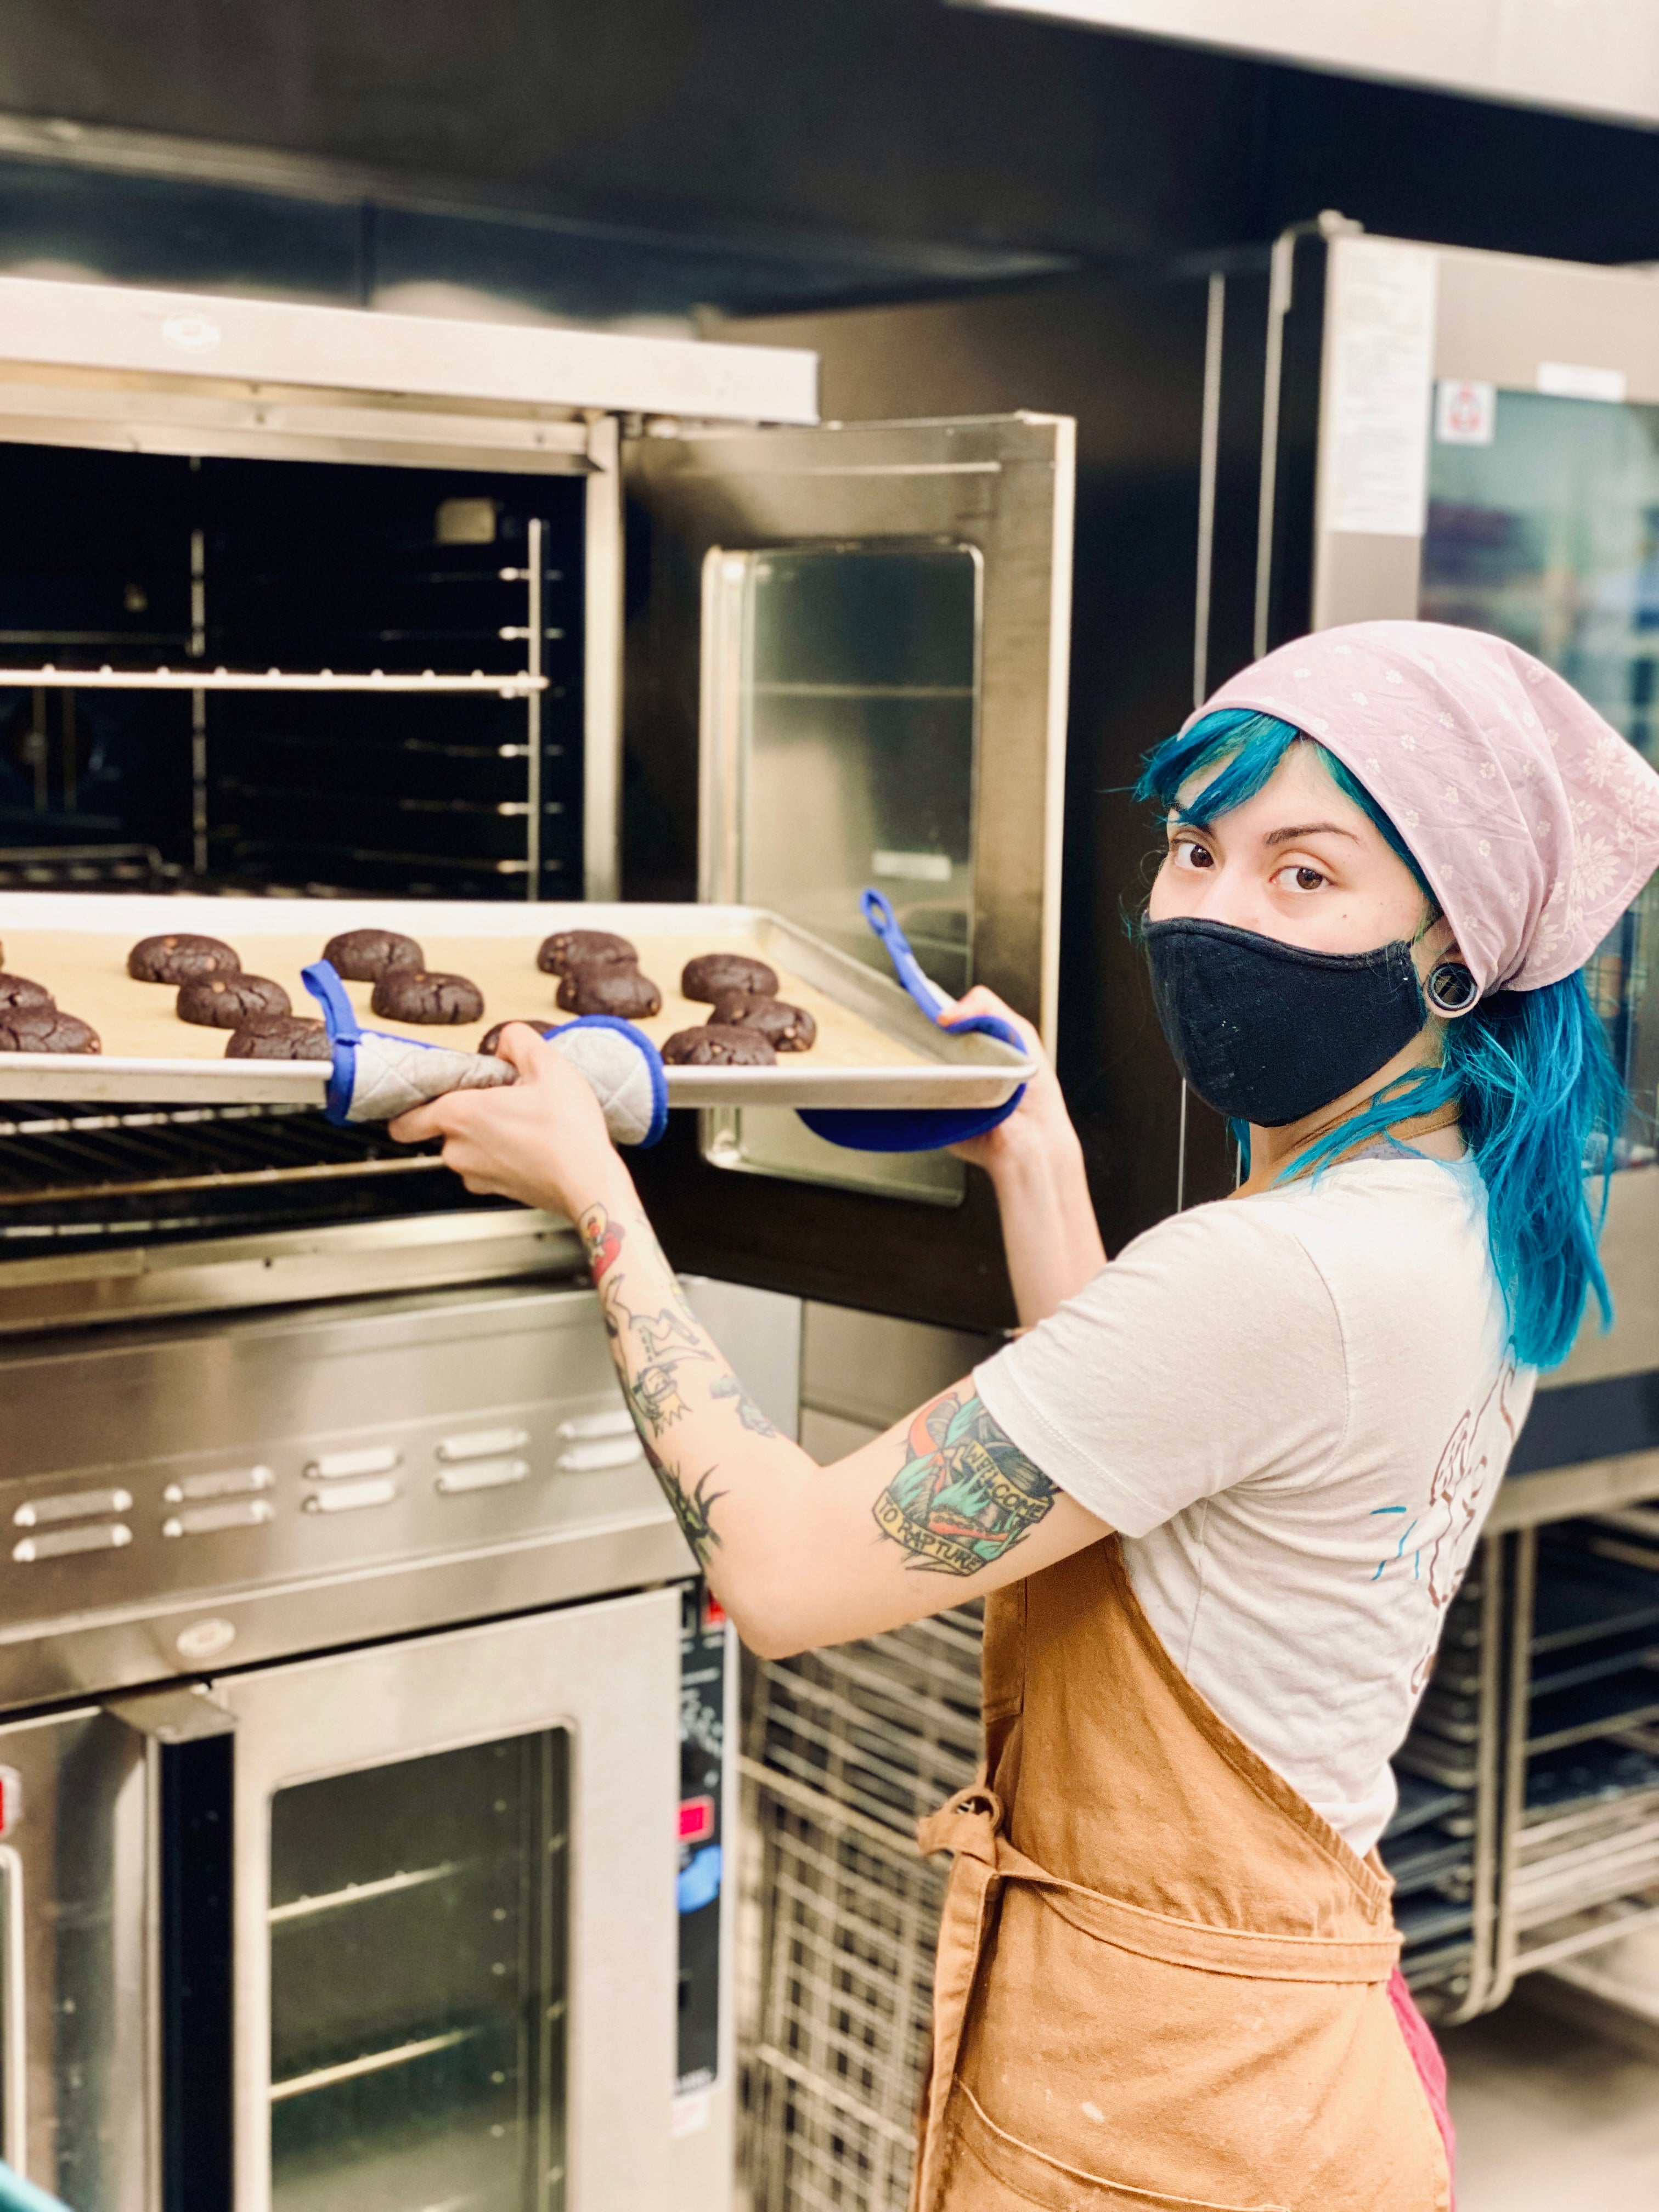 Our bakers handcrafting our products daily, making the best chocolate cookies gluten free vegan and kosher